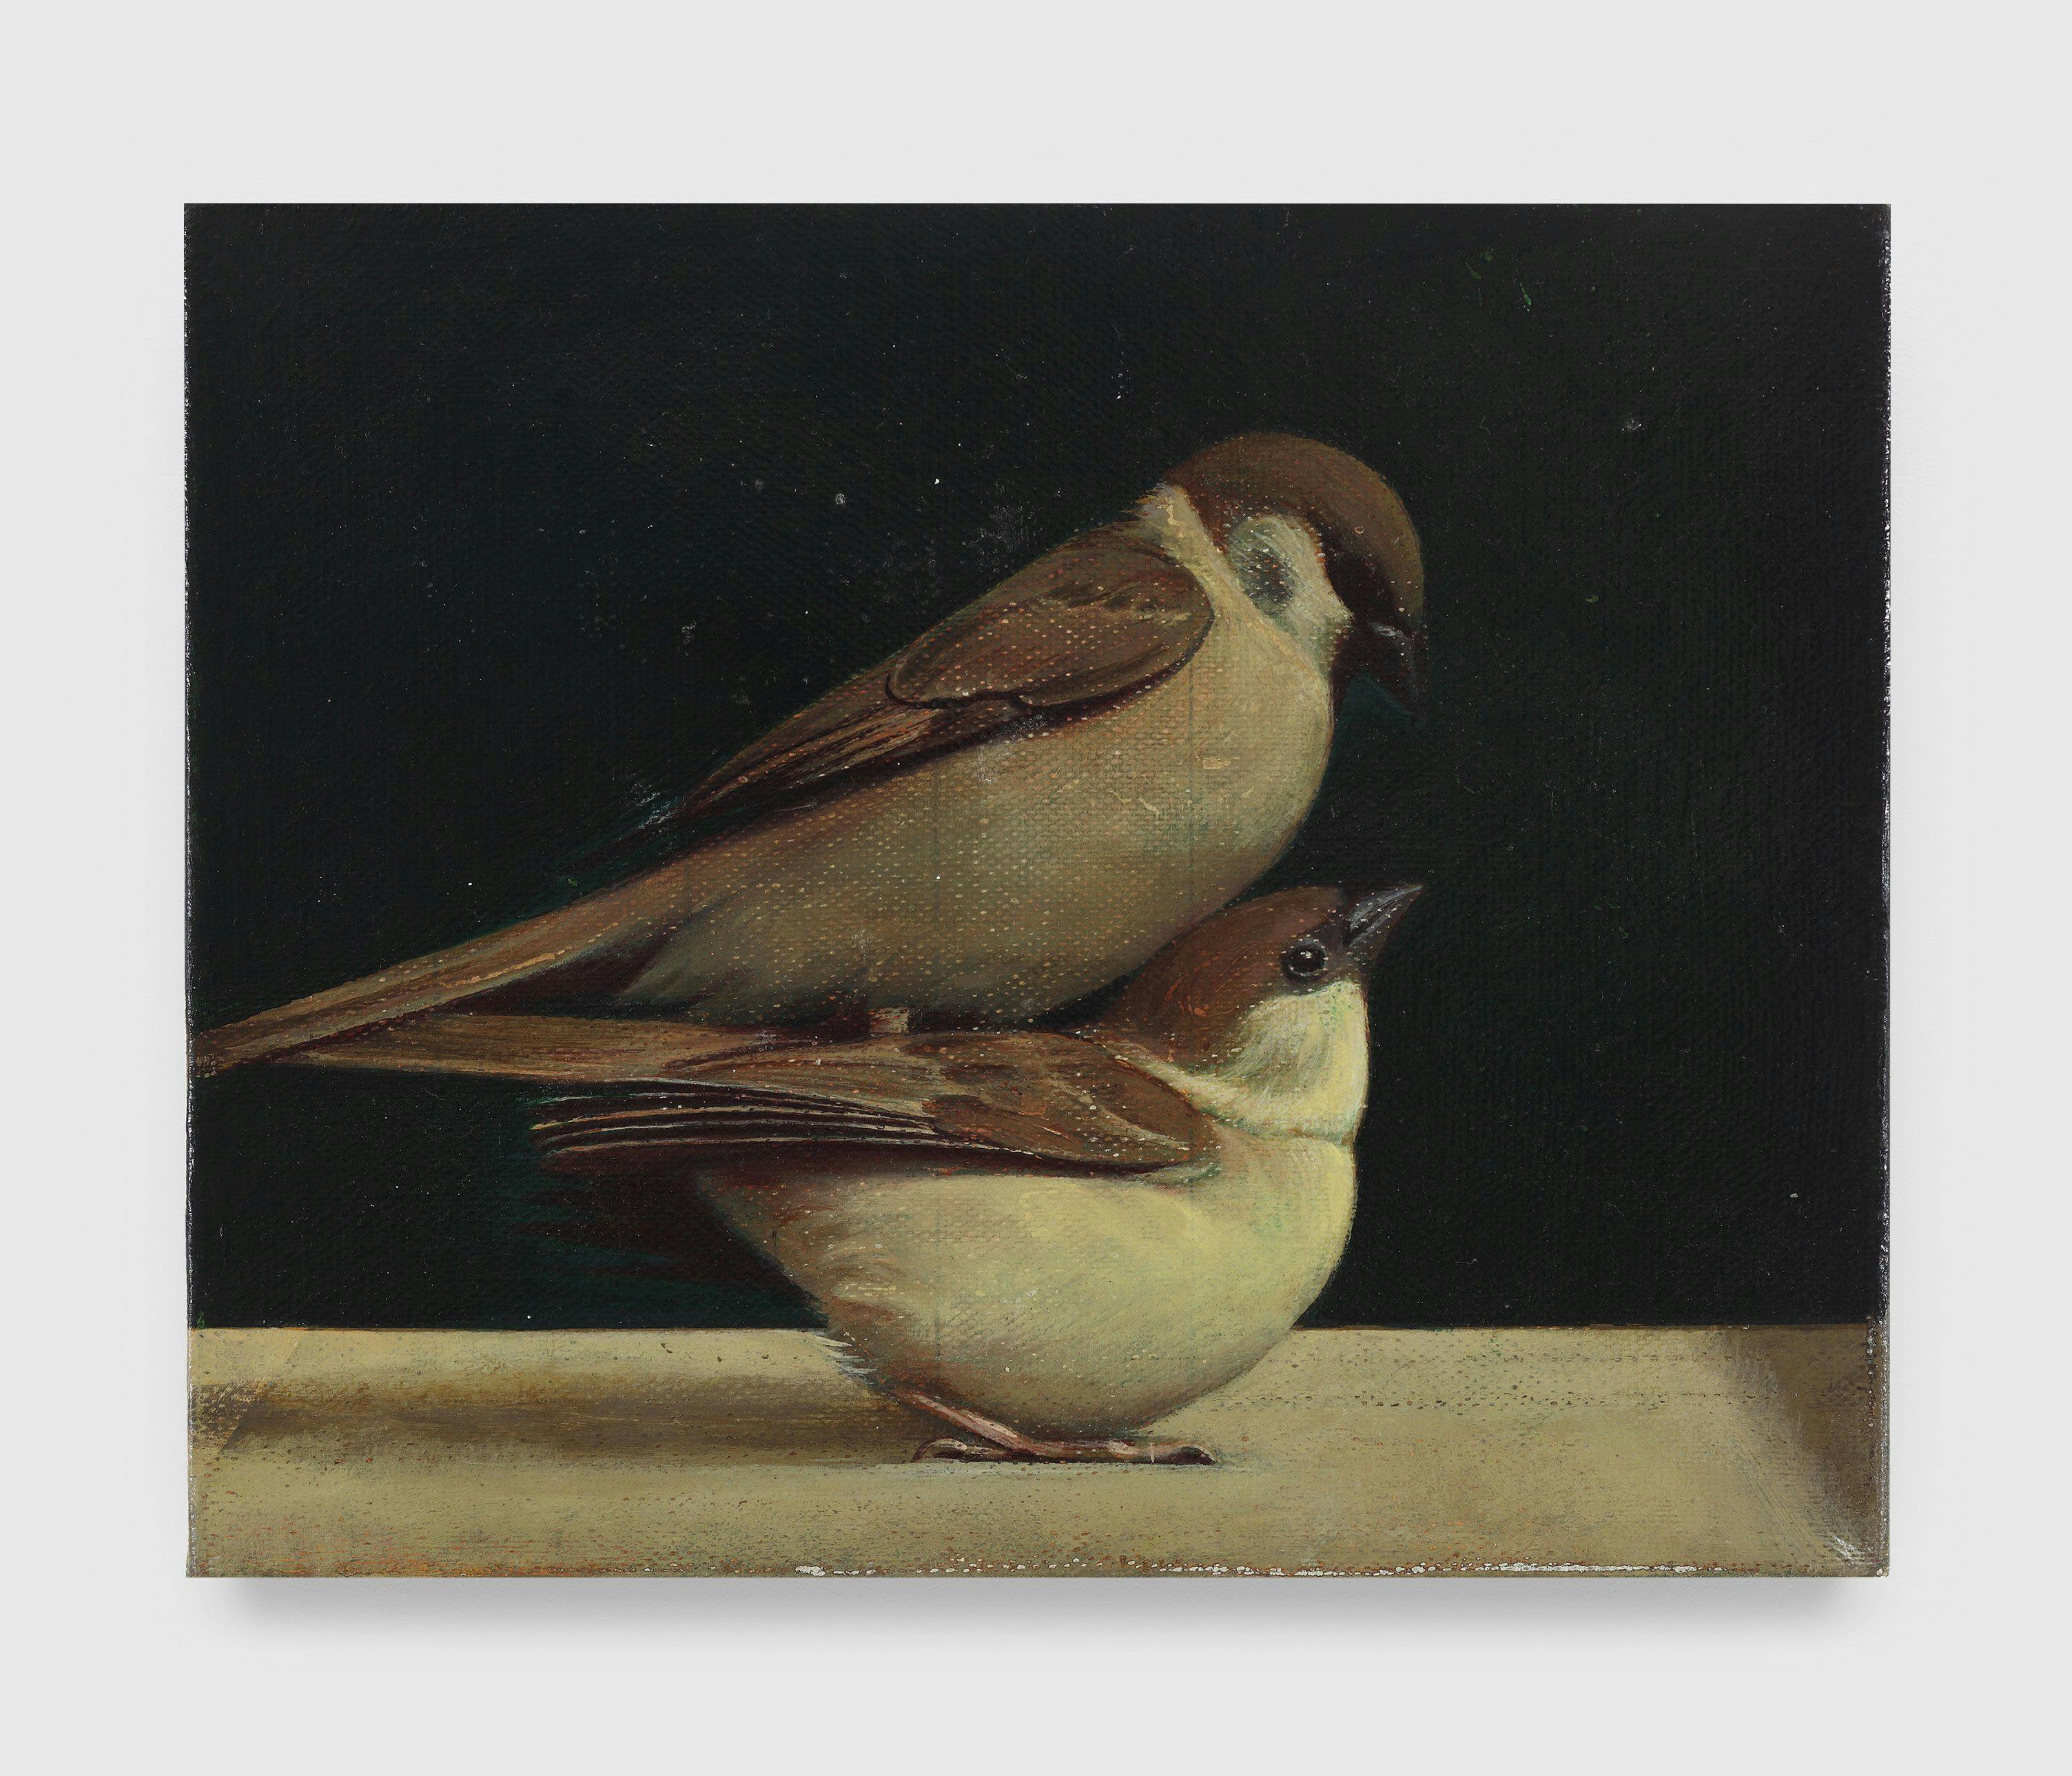 A painting by Liu Ye, titled Bird on Bird, dated 2011.